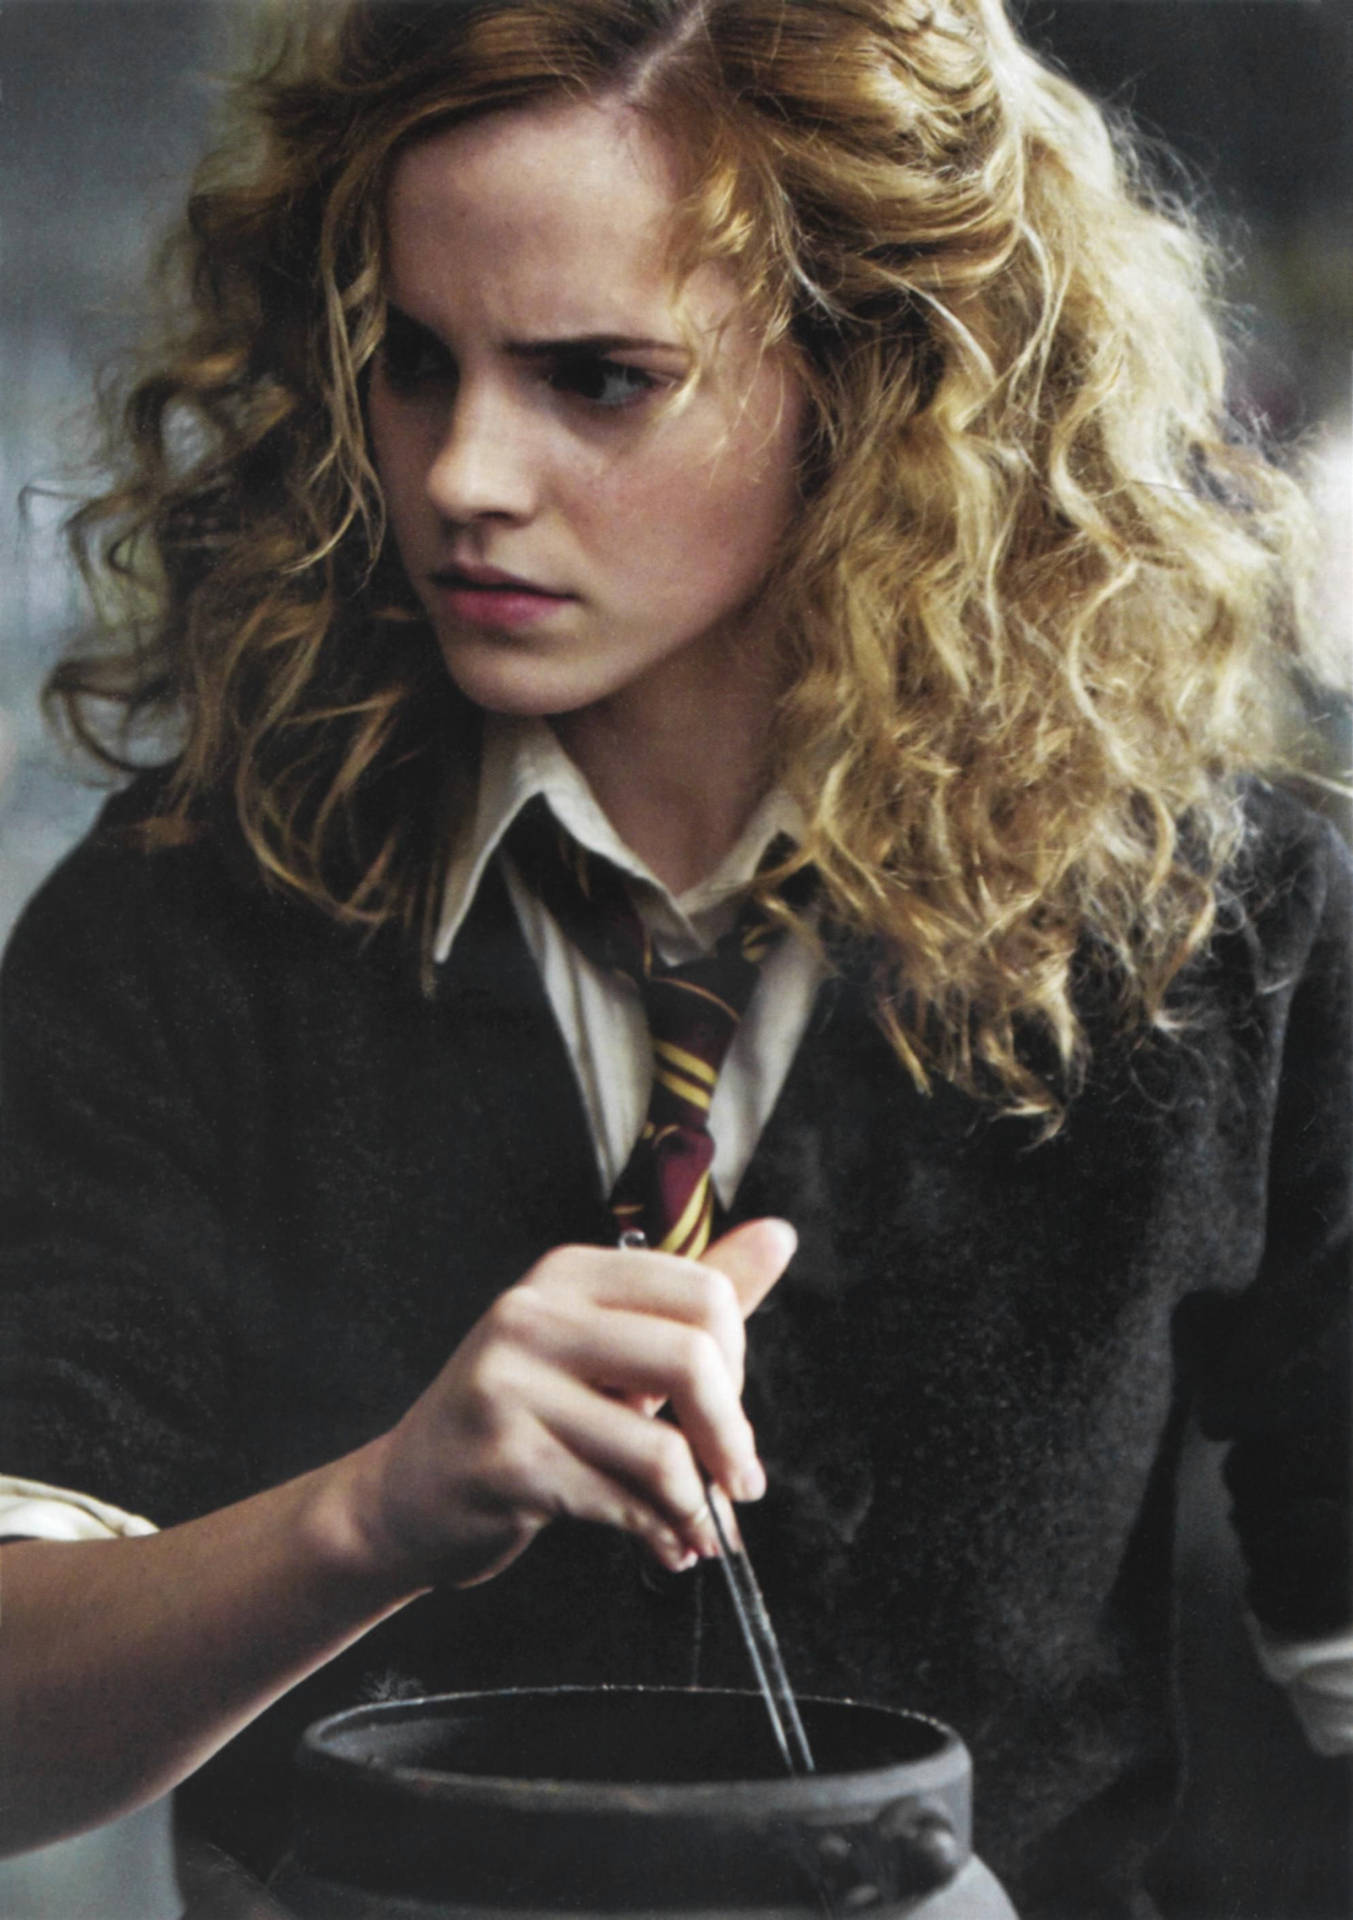 Top 999+ Hermione Granger Wallpaper Full HD, 4K✅Free to Use